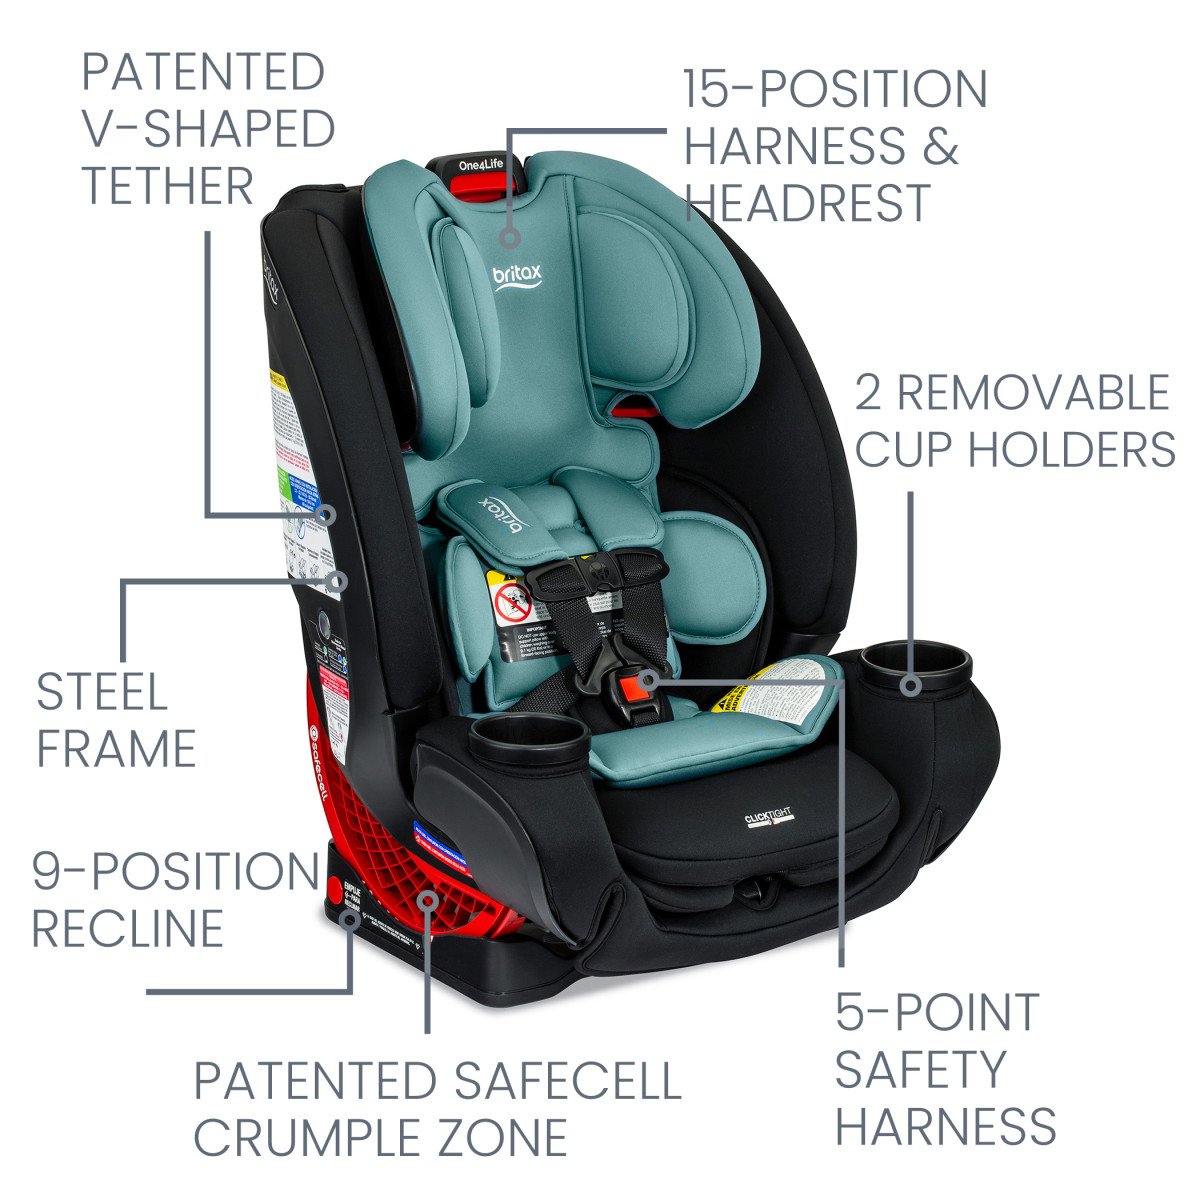 Product Anatomy Labeled on the Jade Onyx One4Life Car Seat